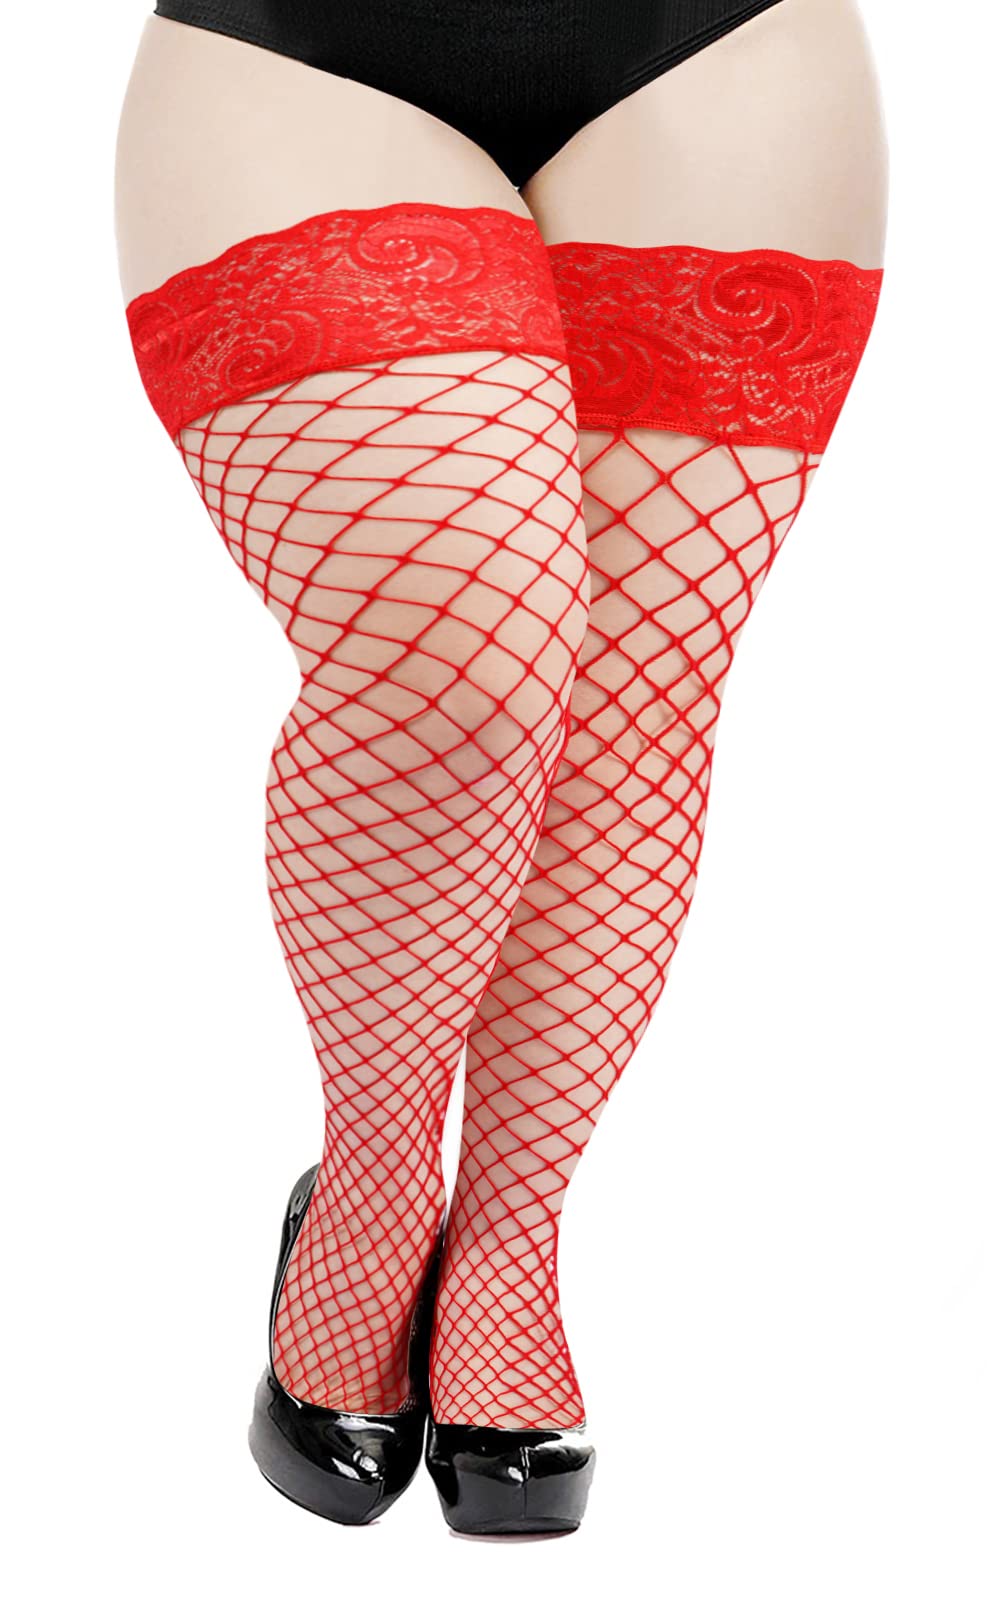 Plus Size Fishnet Stockings Sheer Silicone Lace - Red Medium Mesh - Moon Wood